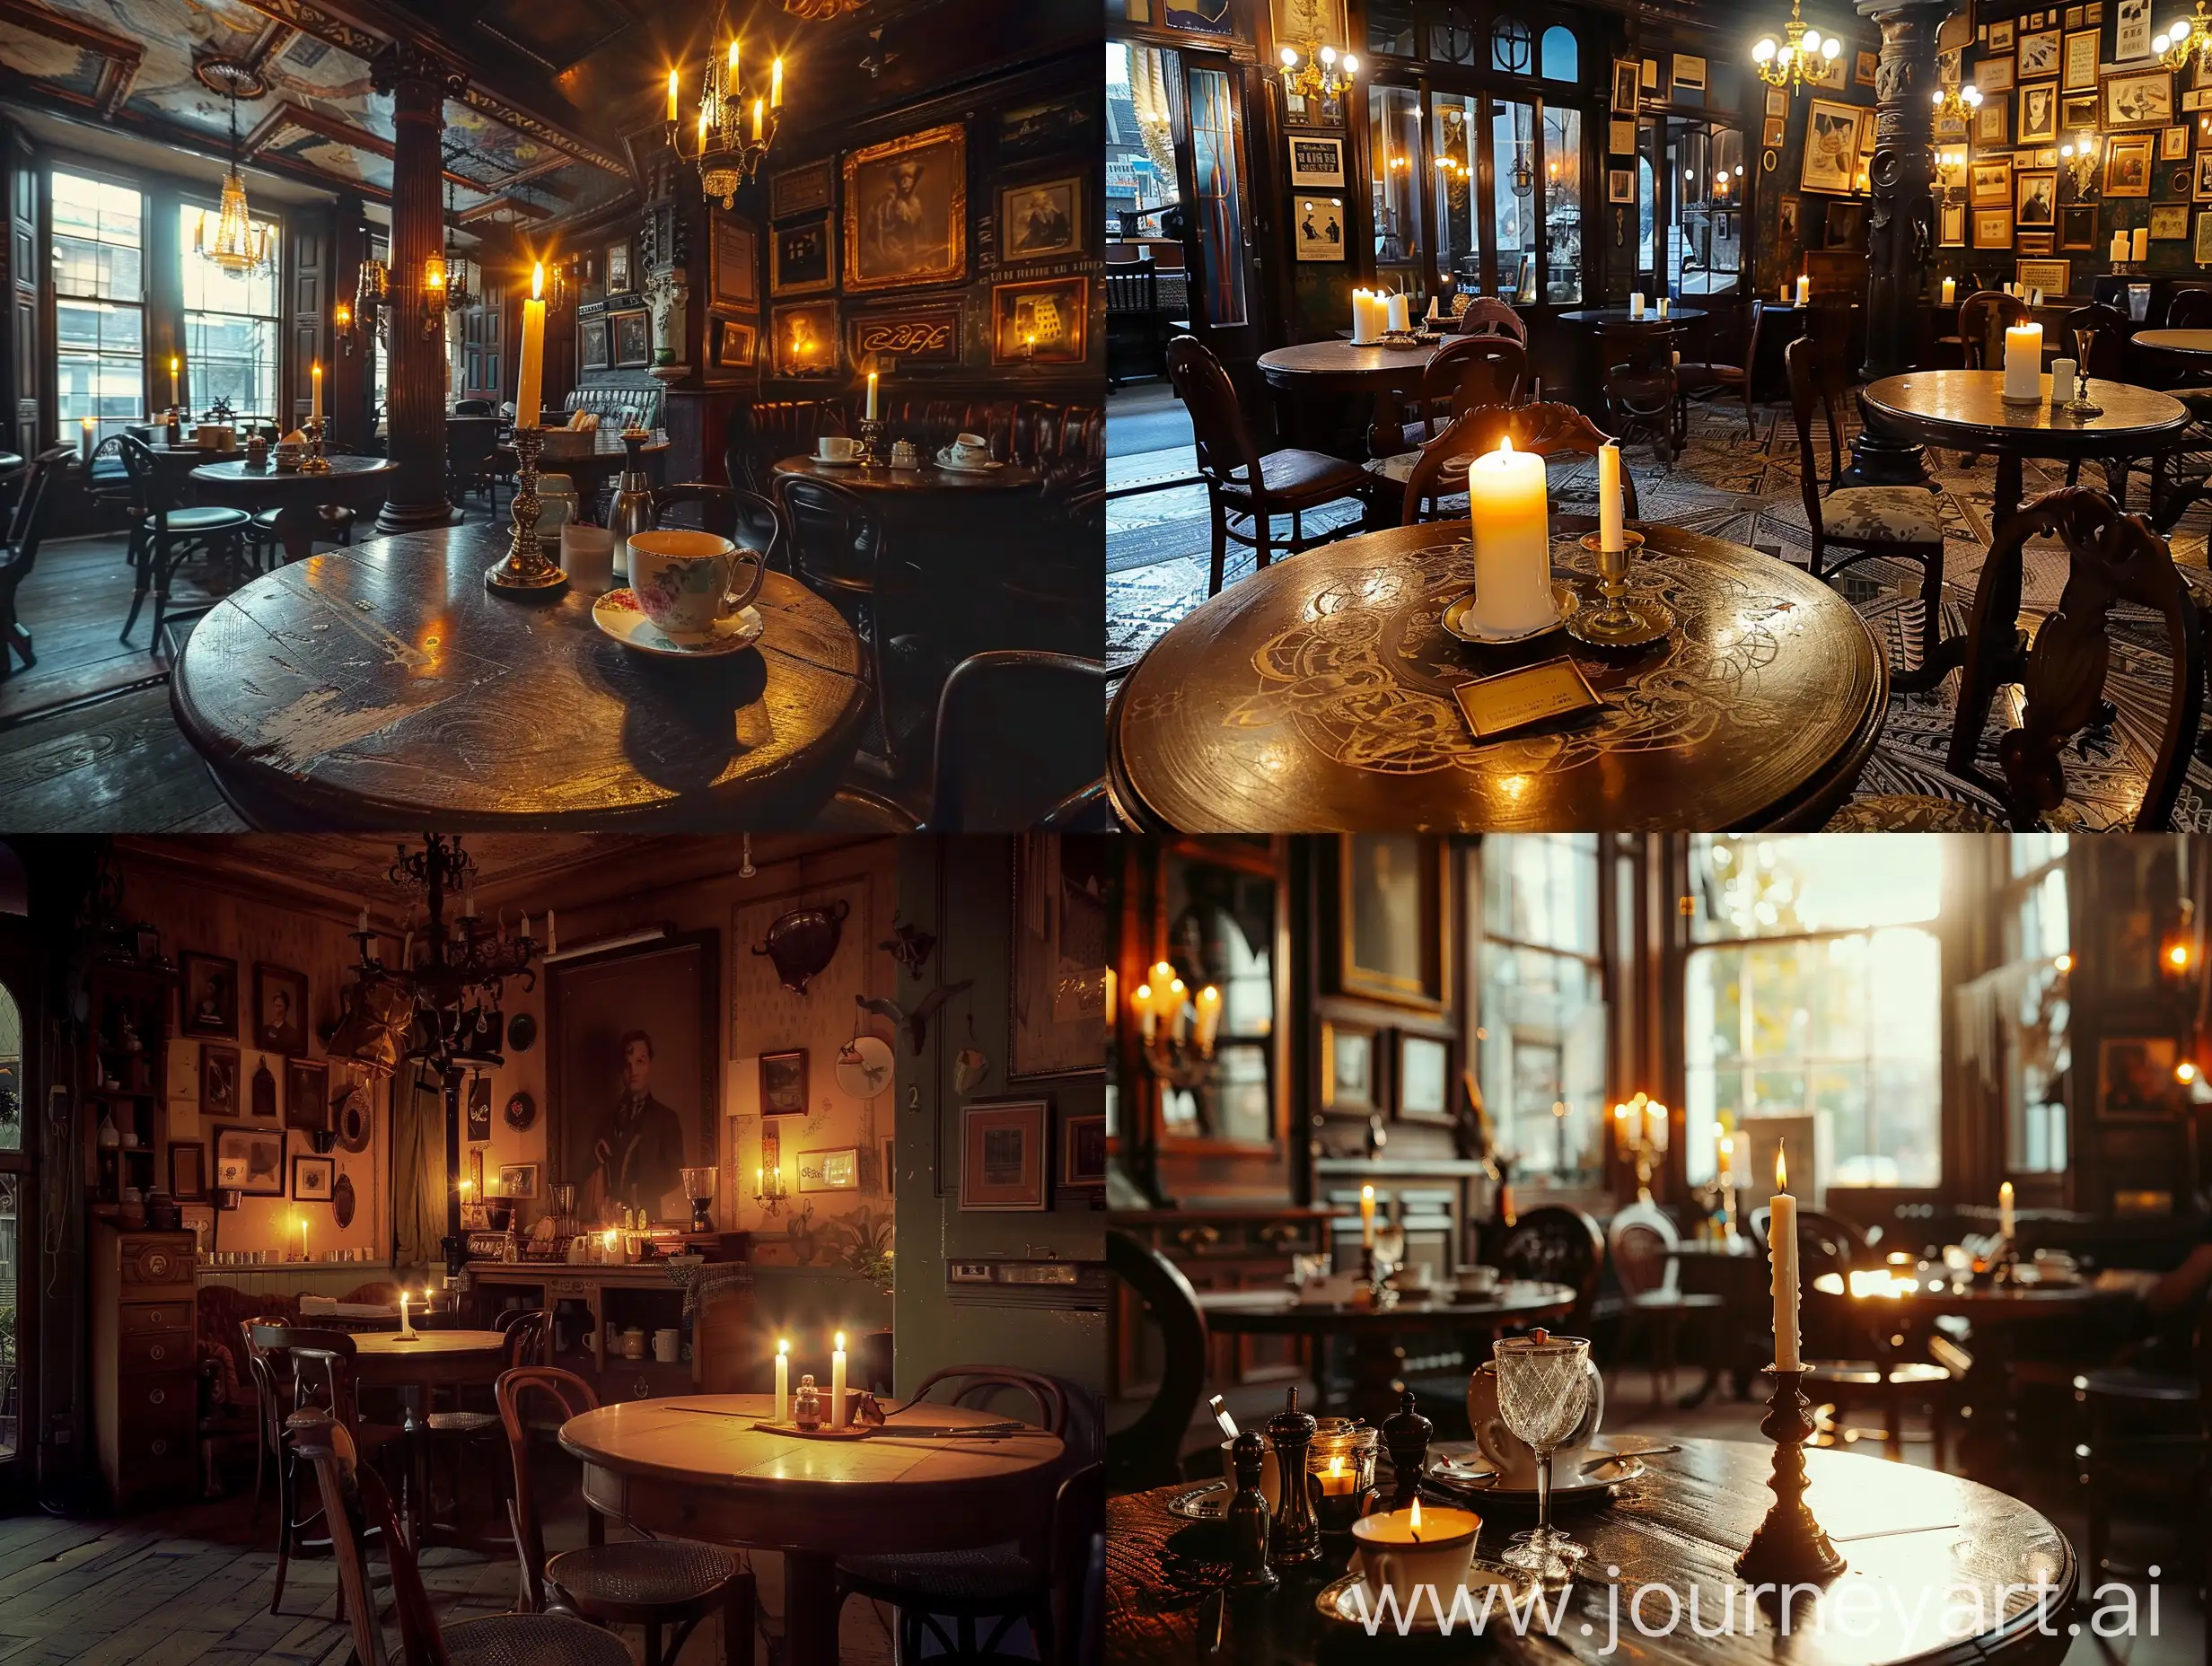 Victorian-London-Coffee-House-Interior-with-Candlelit-Ambiance